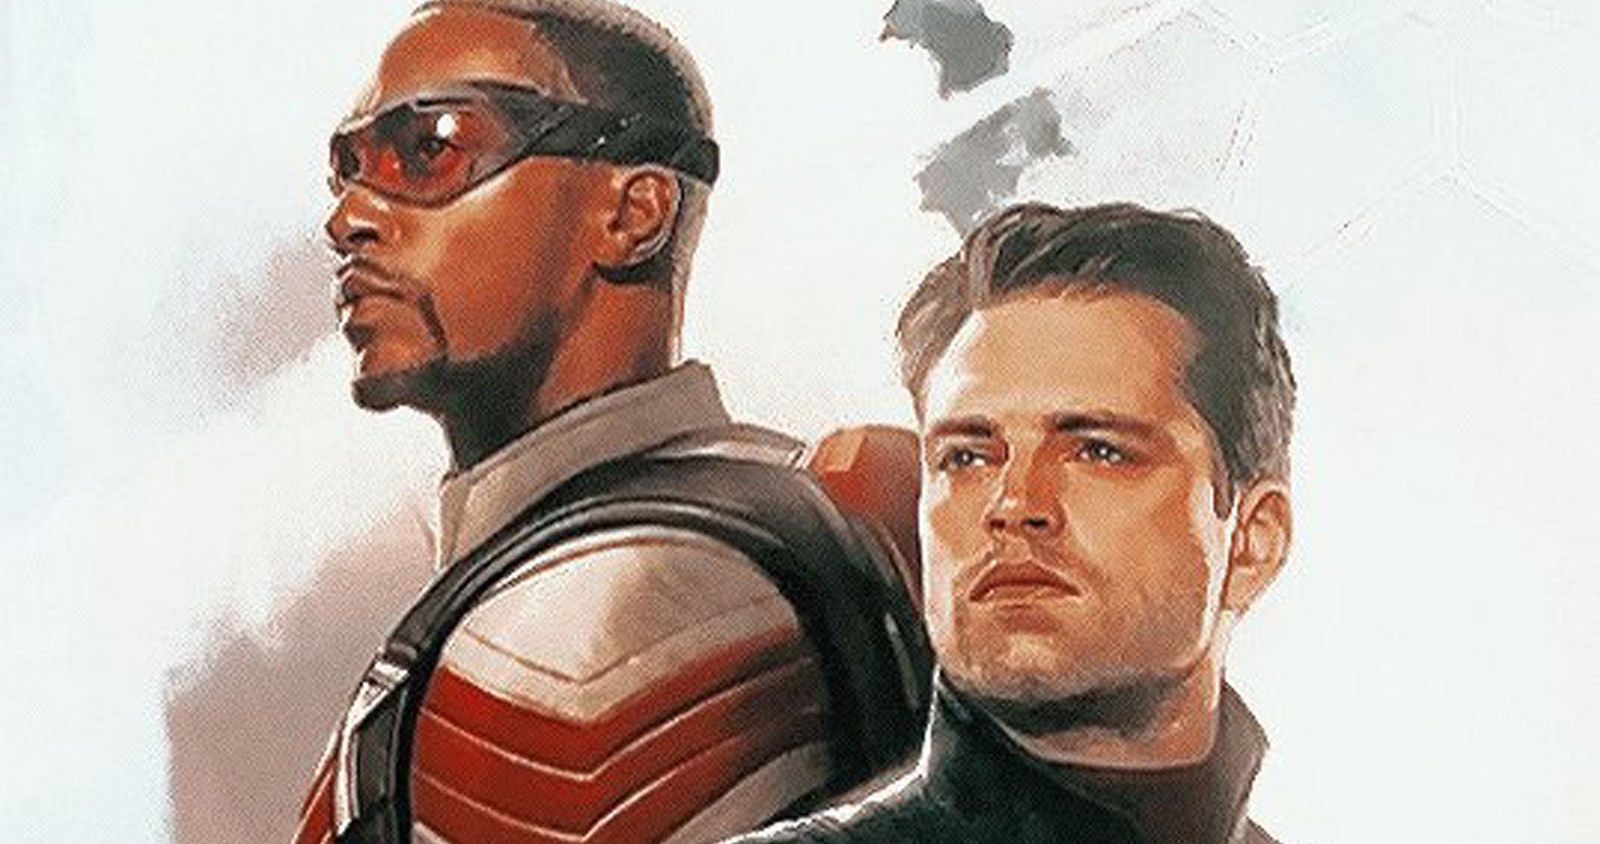 The Falcon and the Winter Soldier Disney+ Series Starts Production This Week